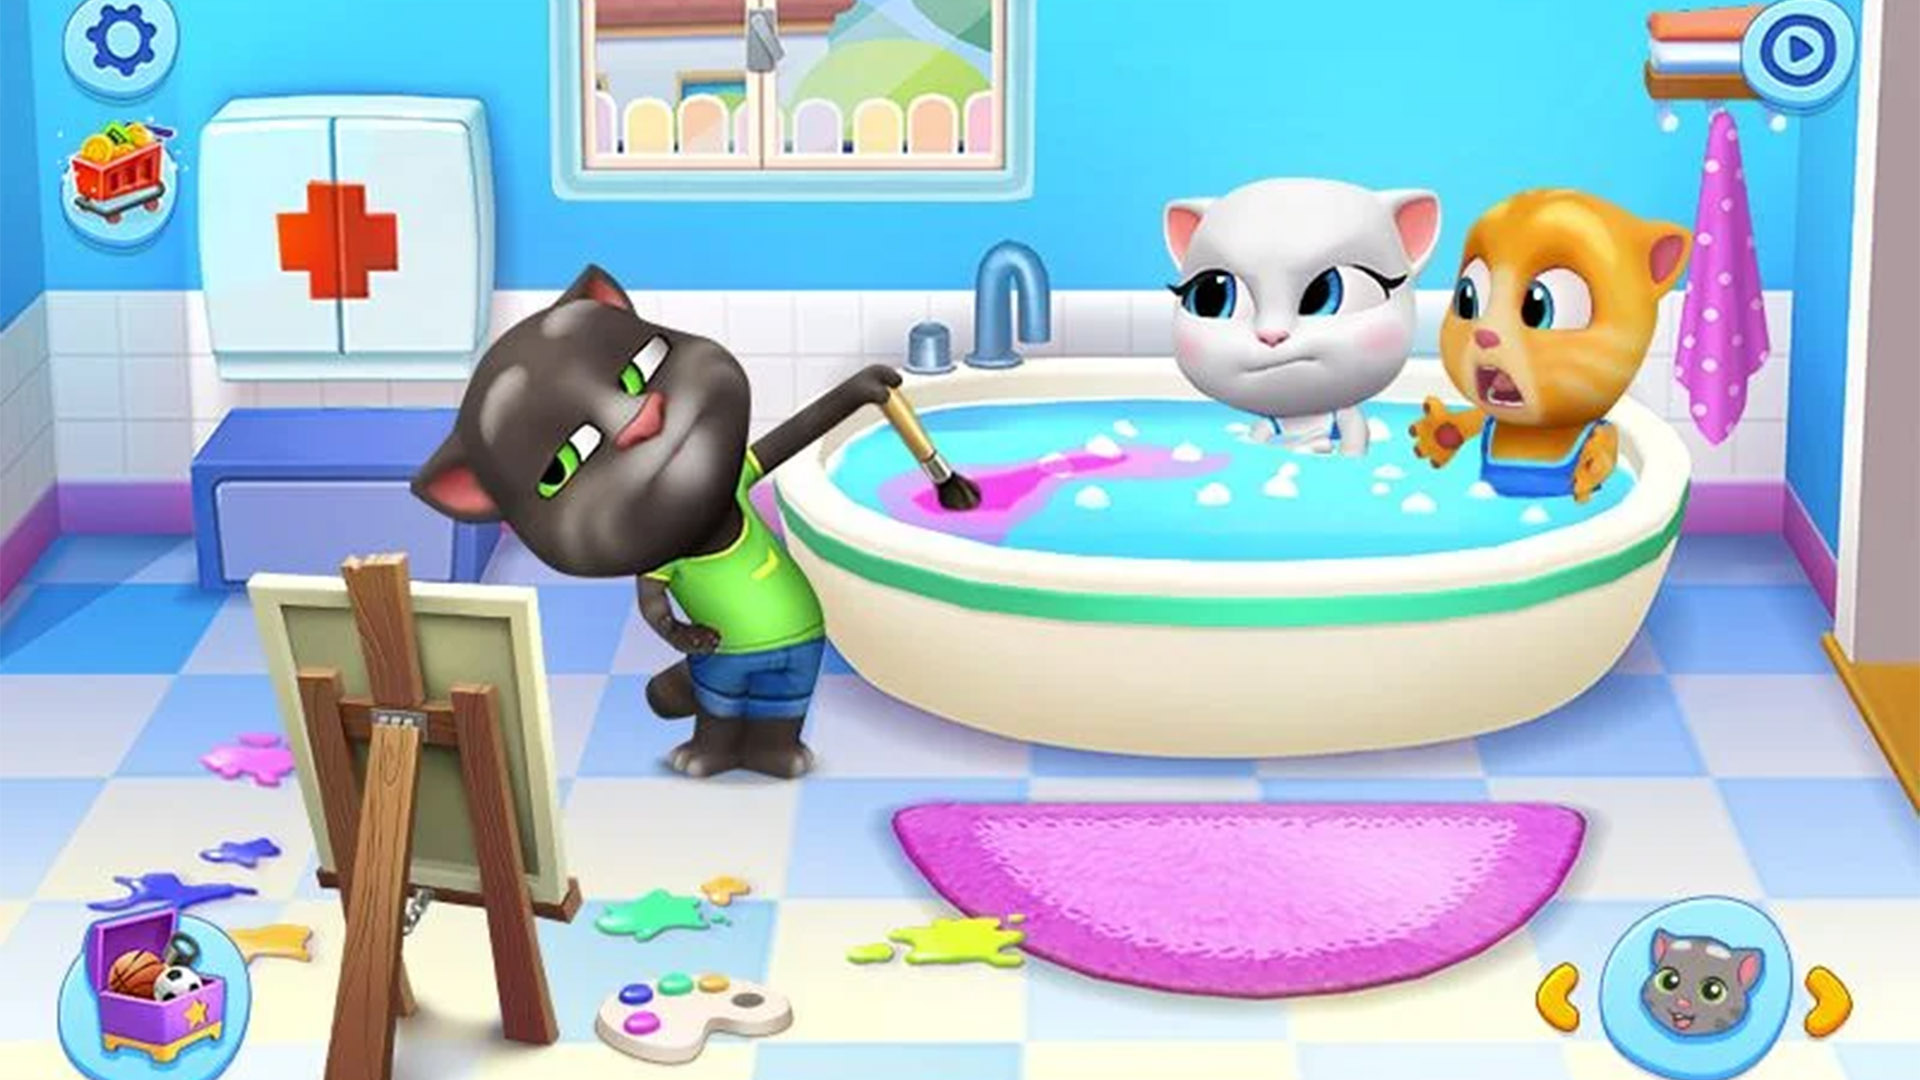 My Talking Tom Friends screenshot from the Google Play Store for the 322nd Android Apps Weekly